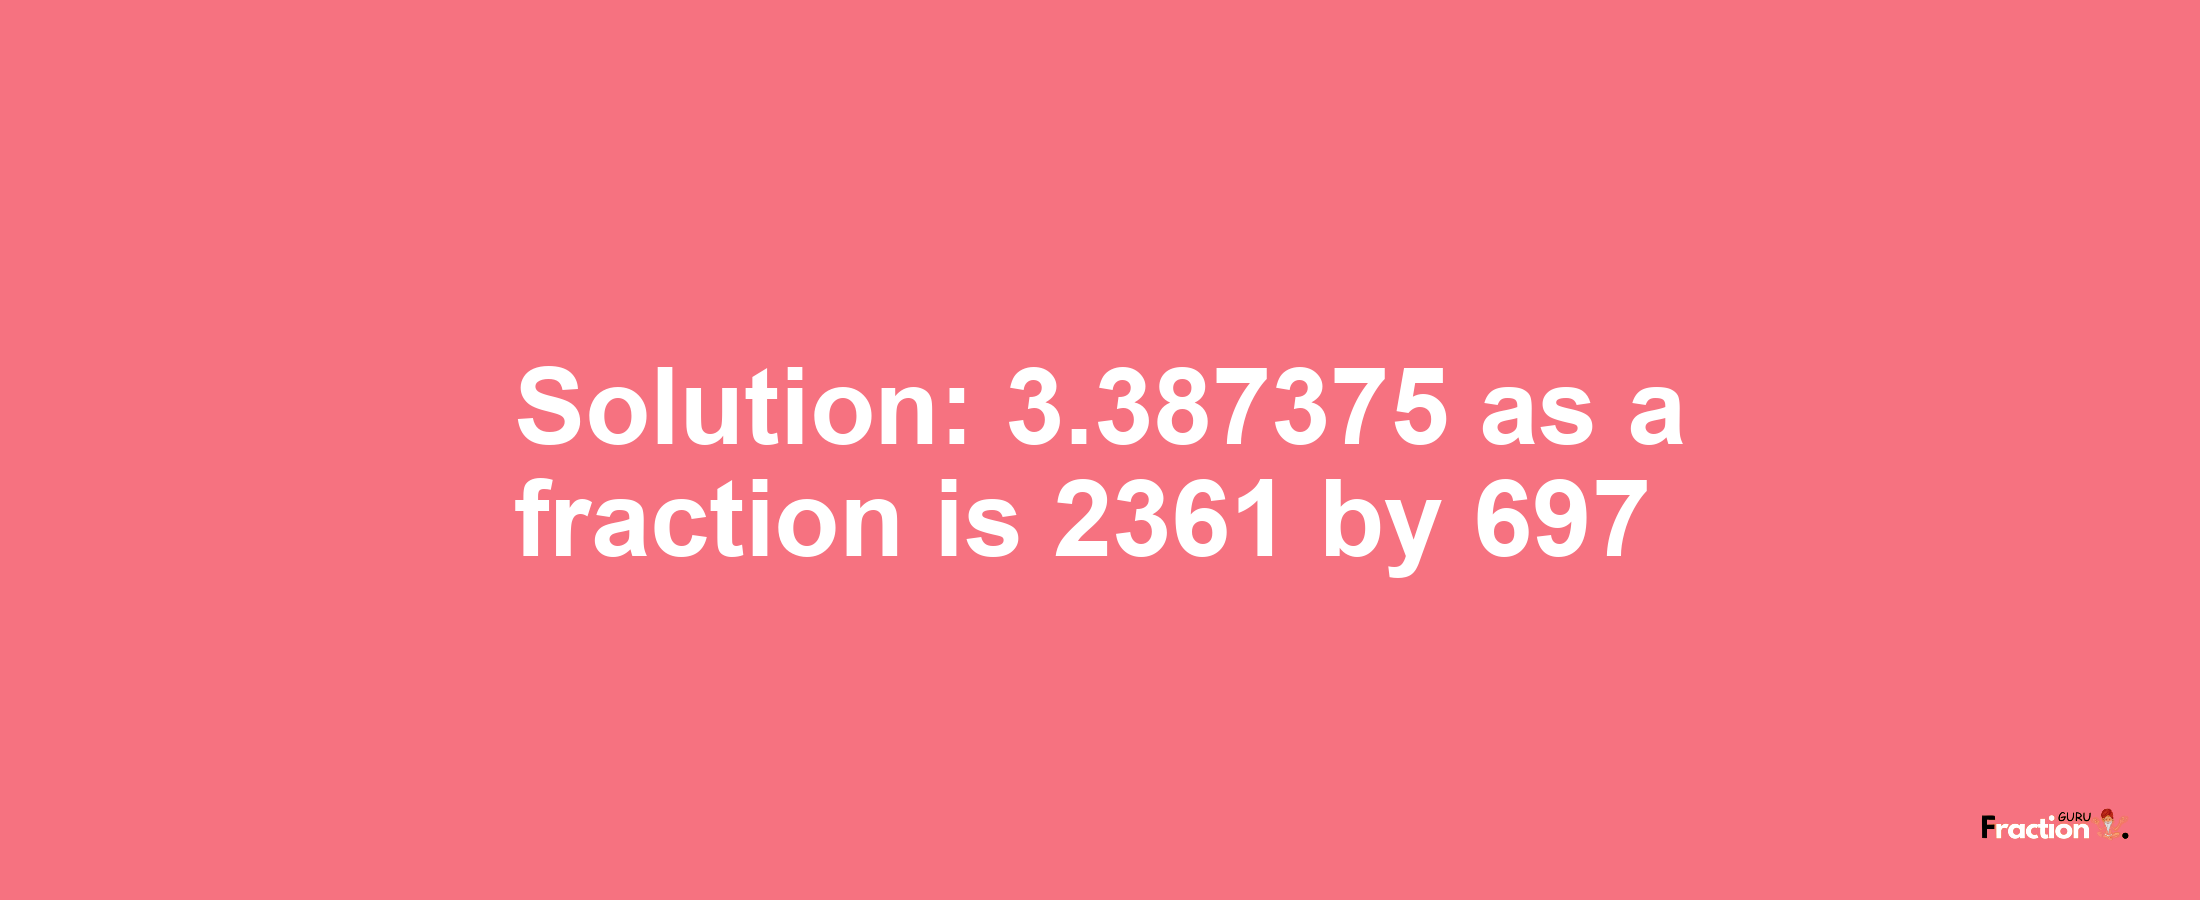 Solution:3.387375 as a fraction is 2361/697